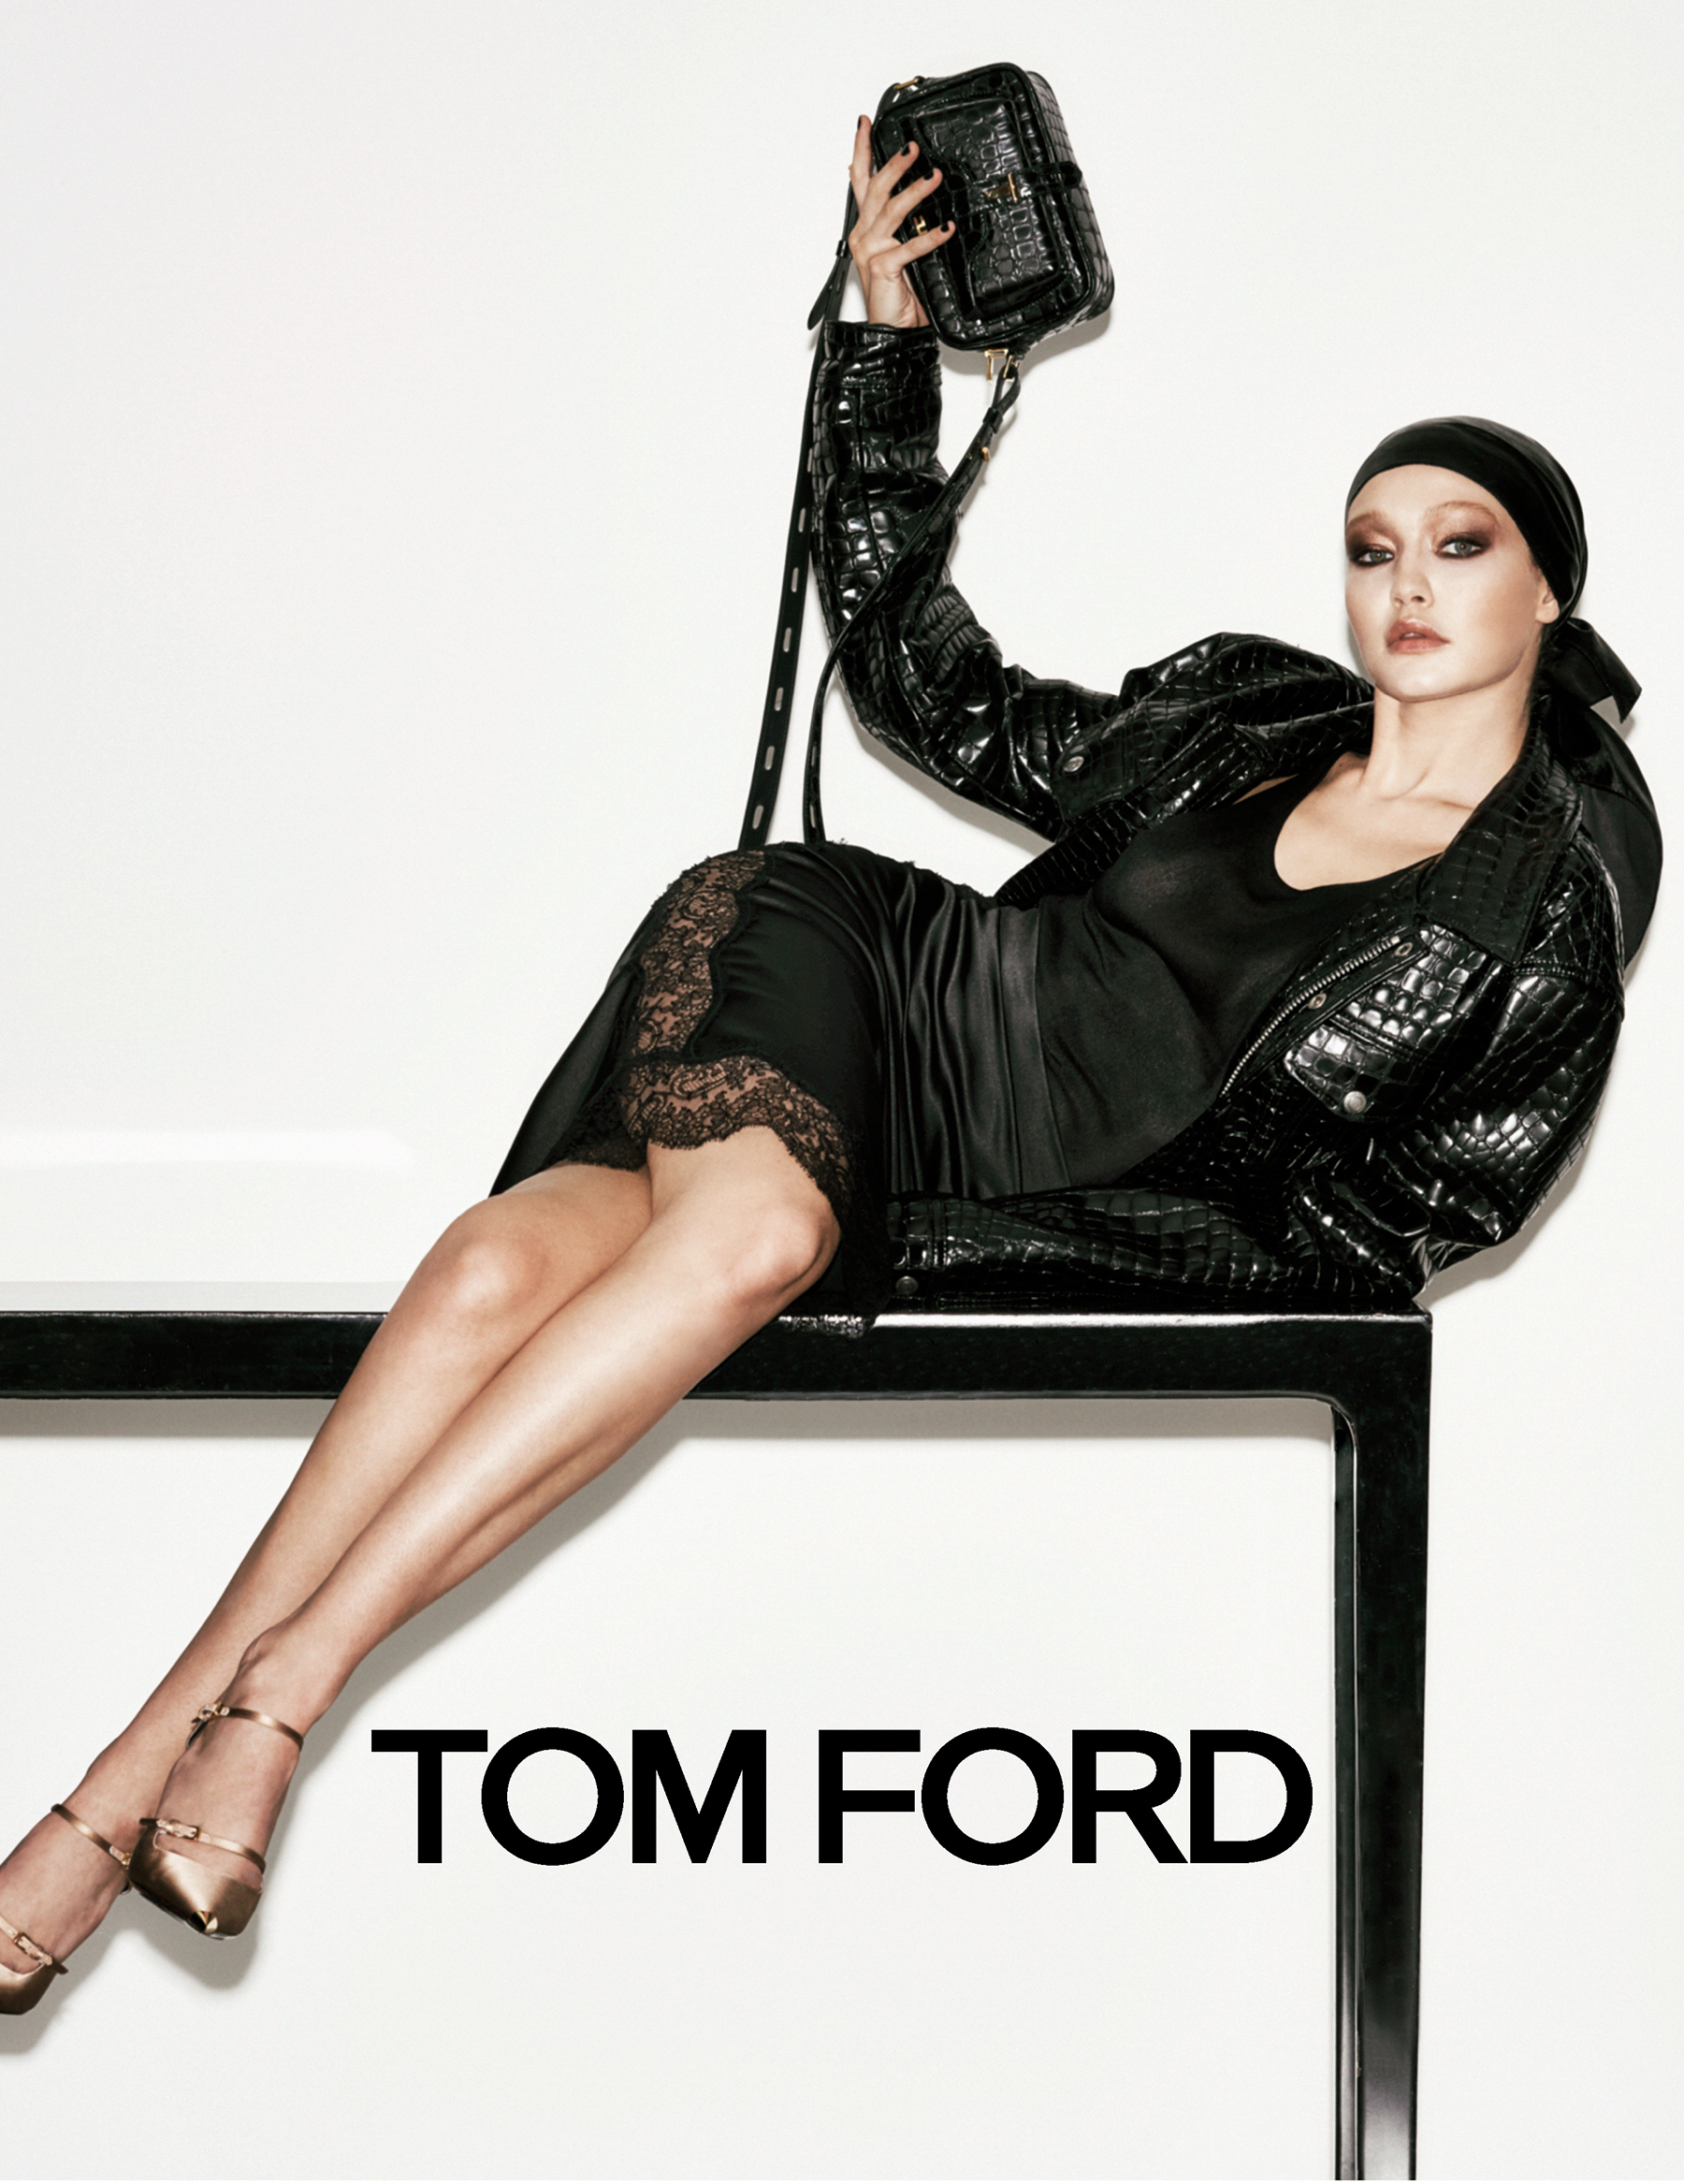 Tom Ford Spring Summer 2019 Campaign